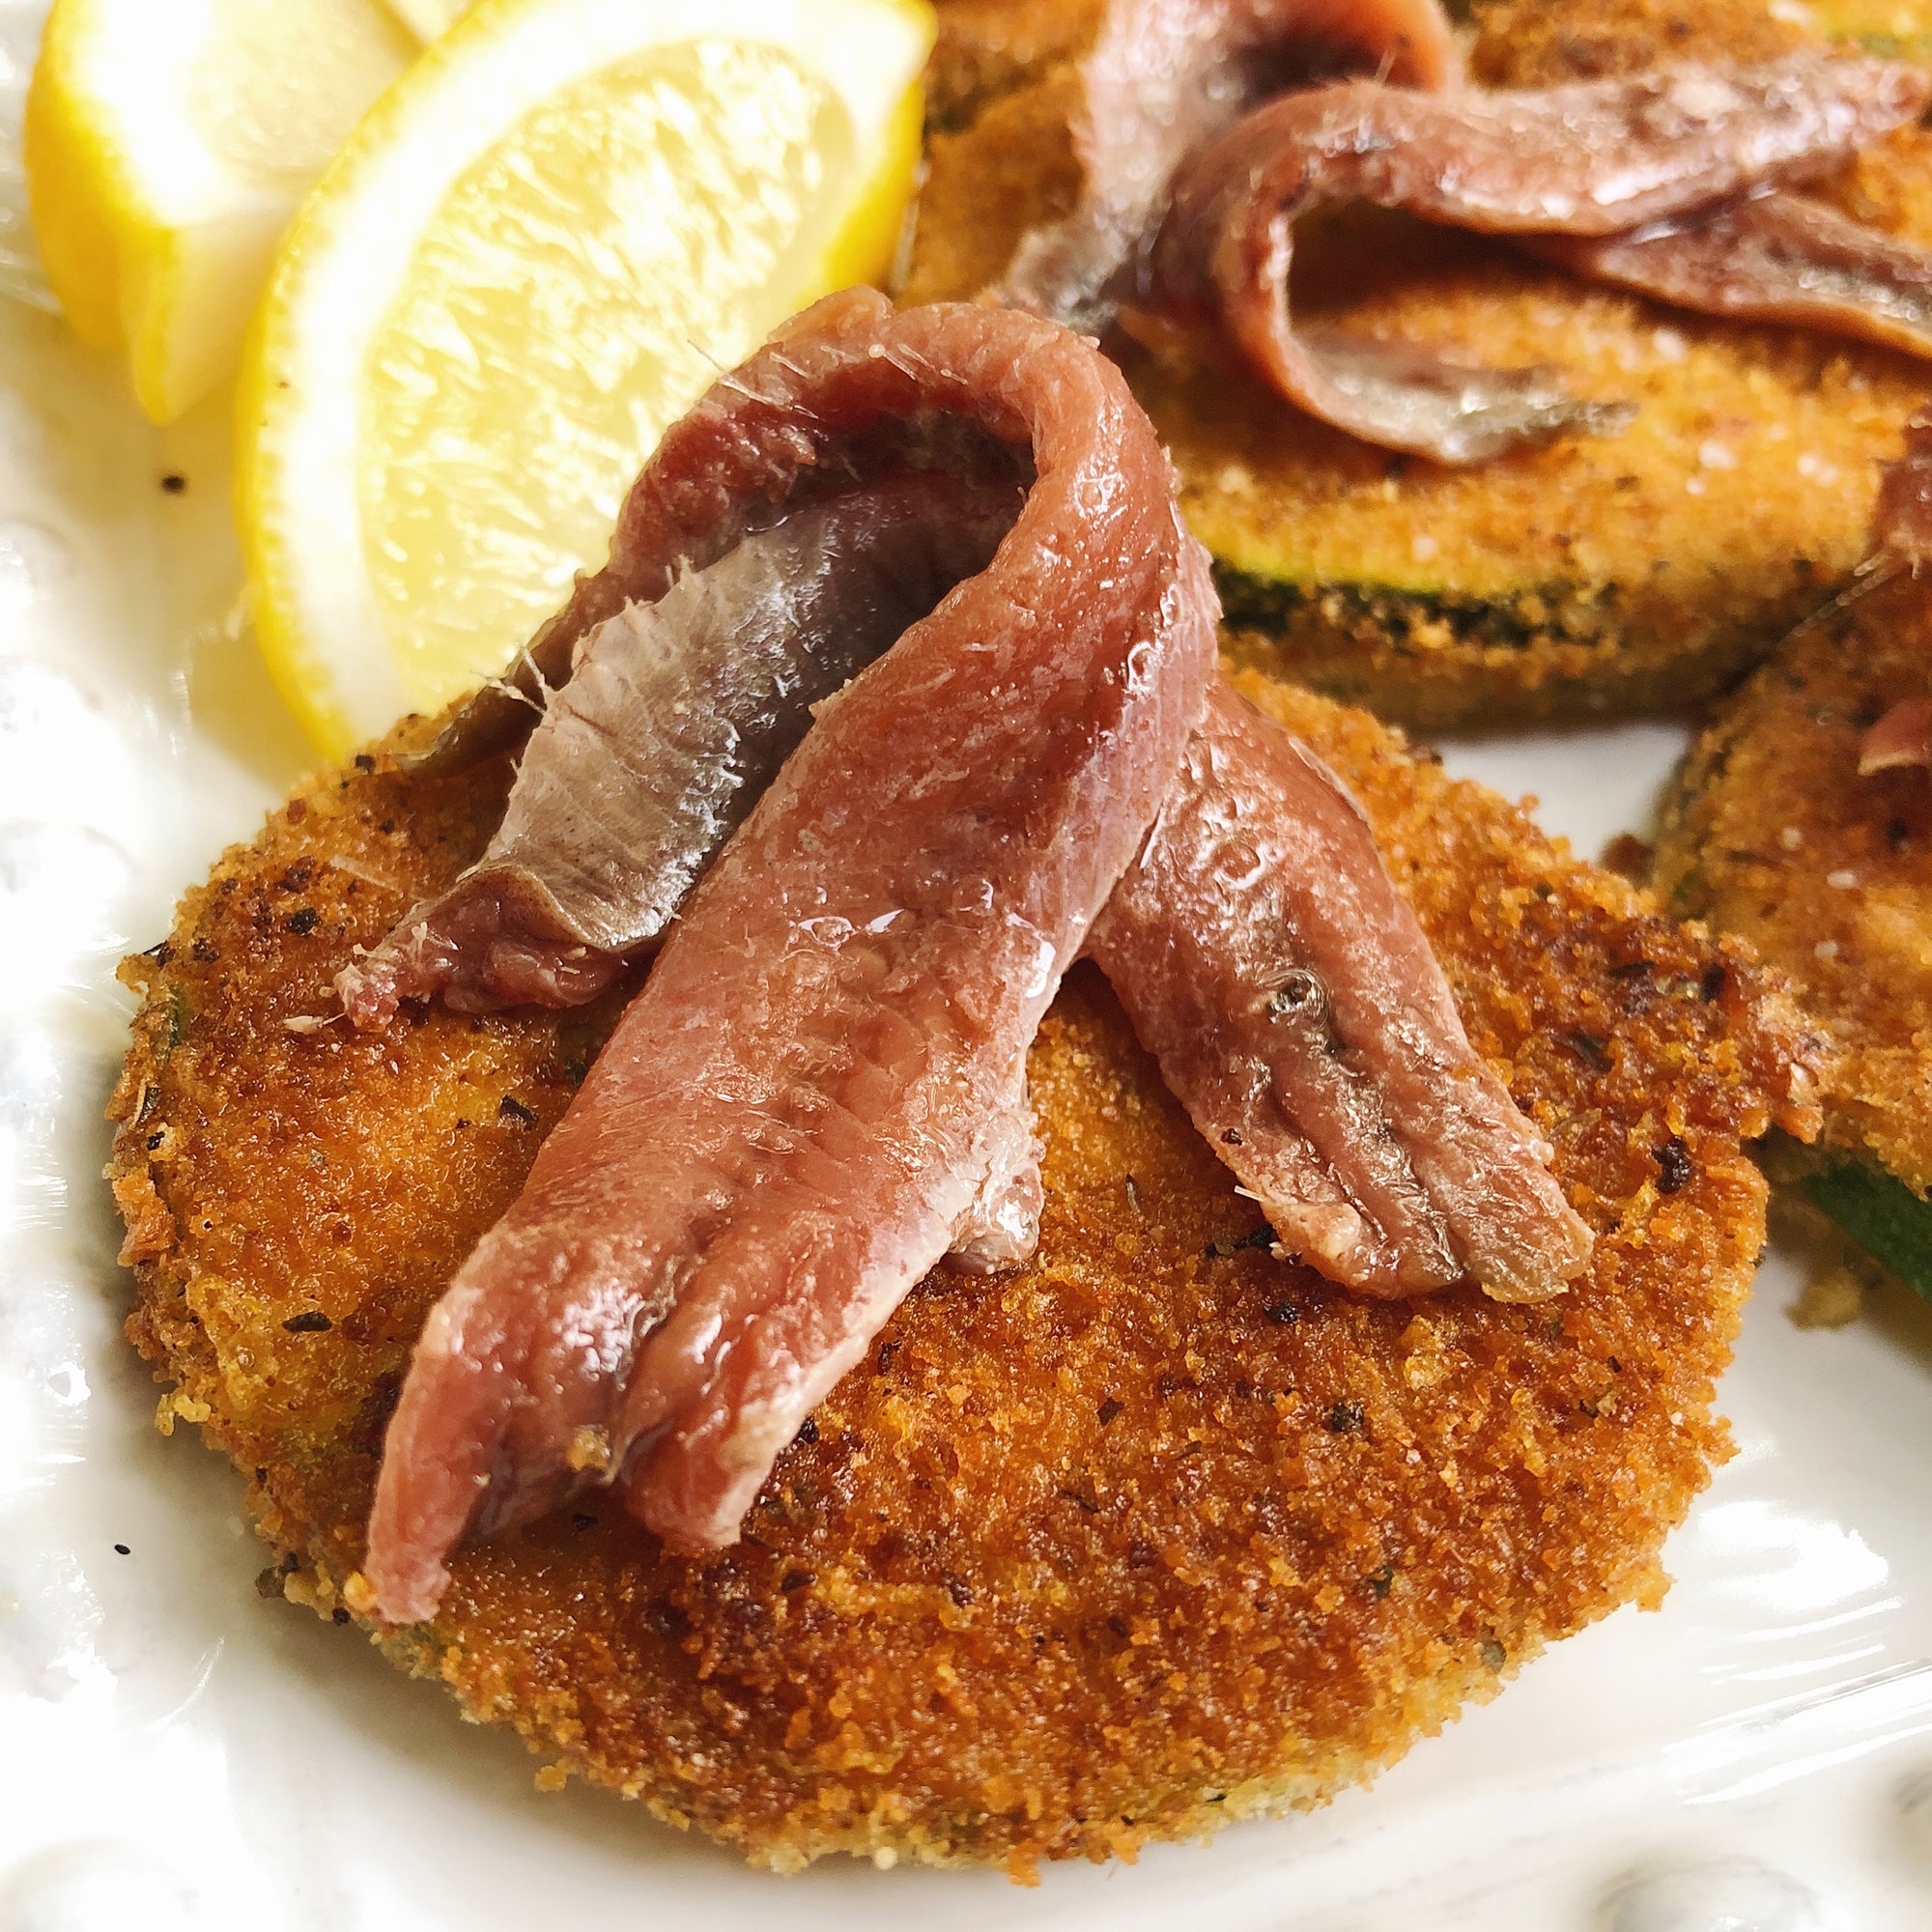 Cantabrian Anchovies and Pan-Fried Zucchini Chips with lemon on a plate - Donostia Foods